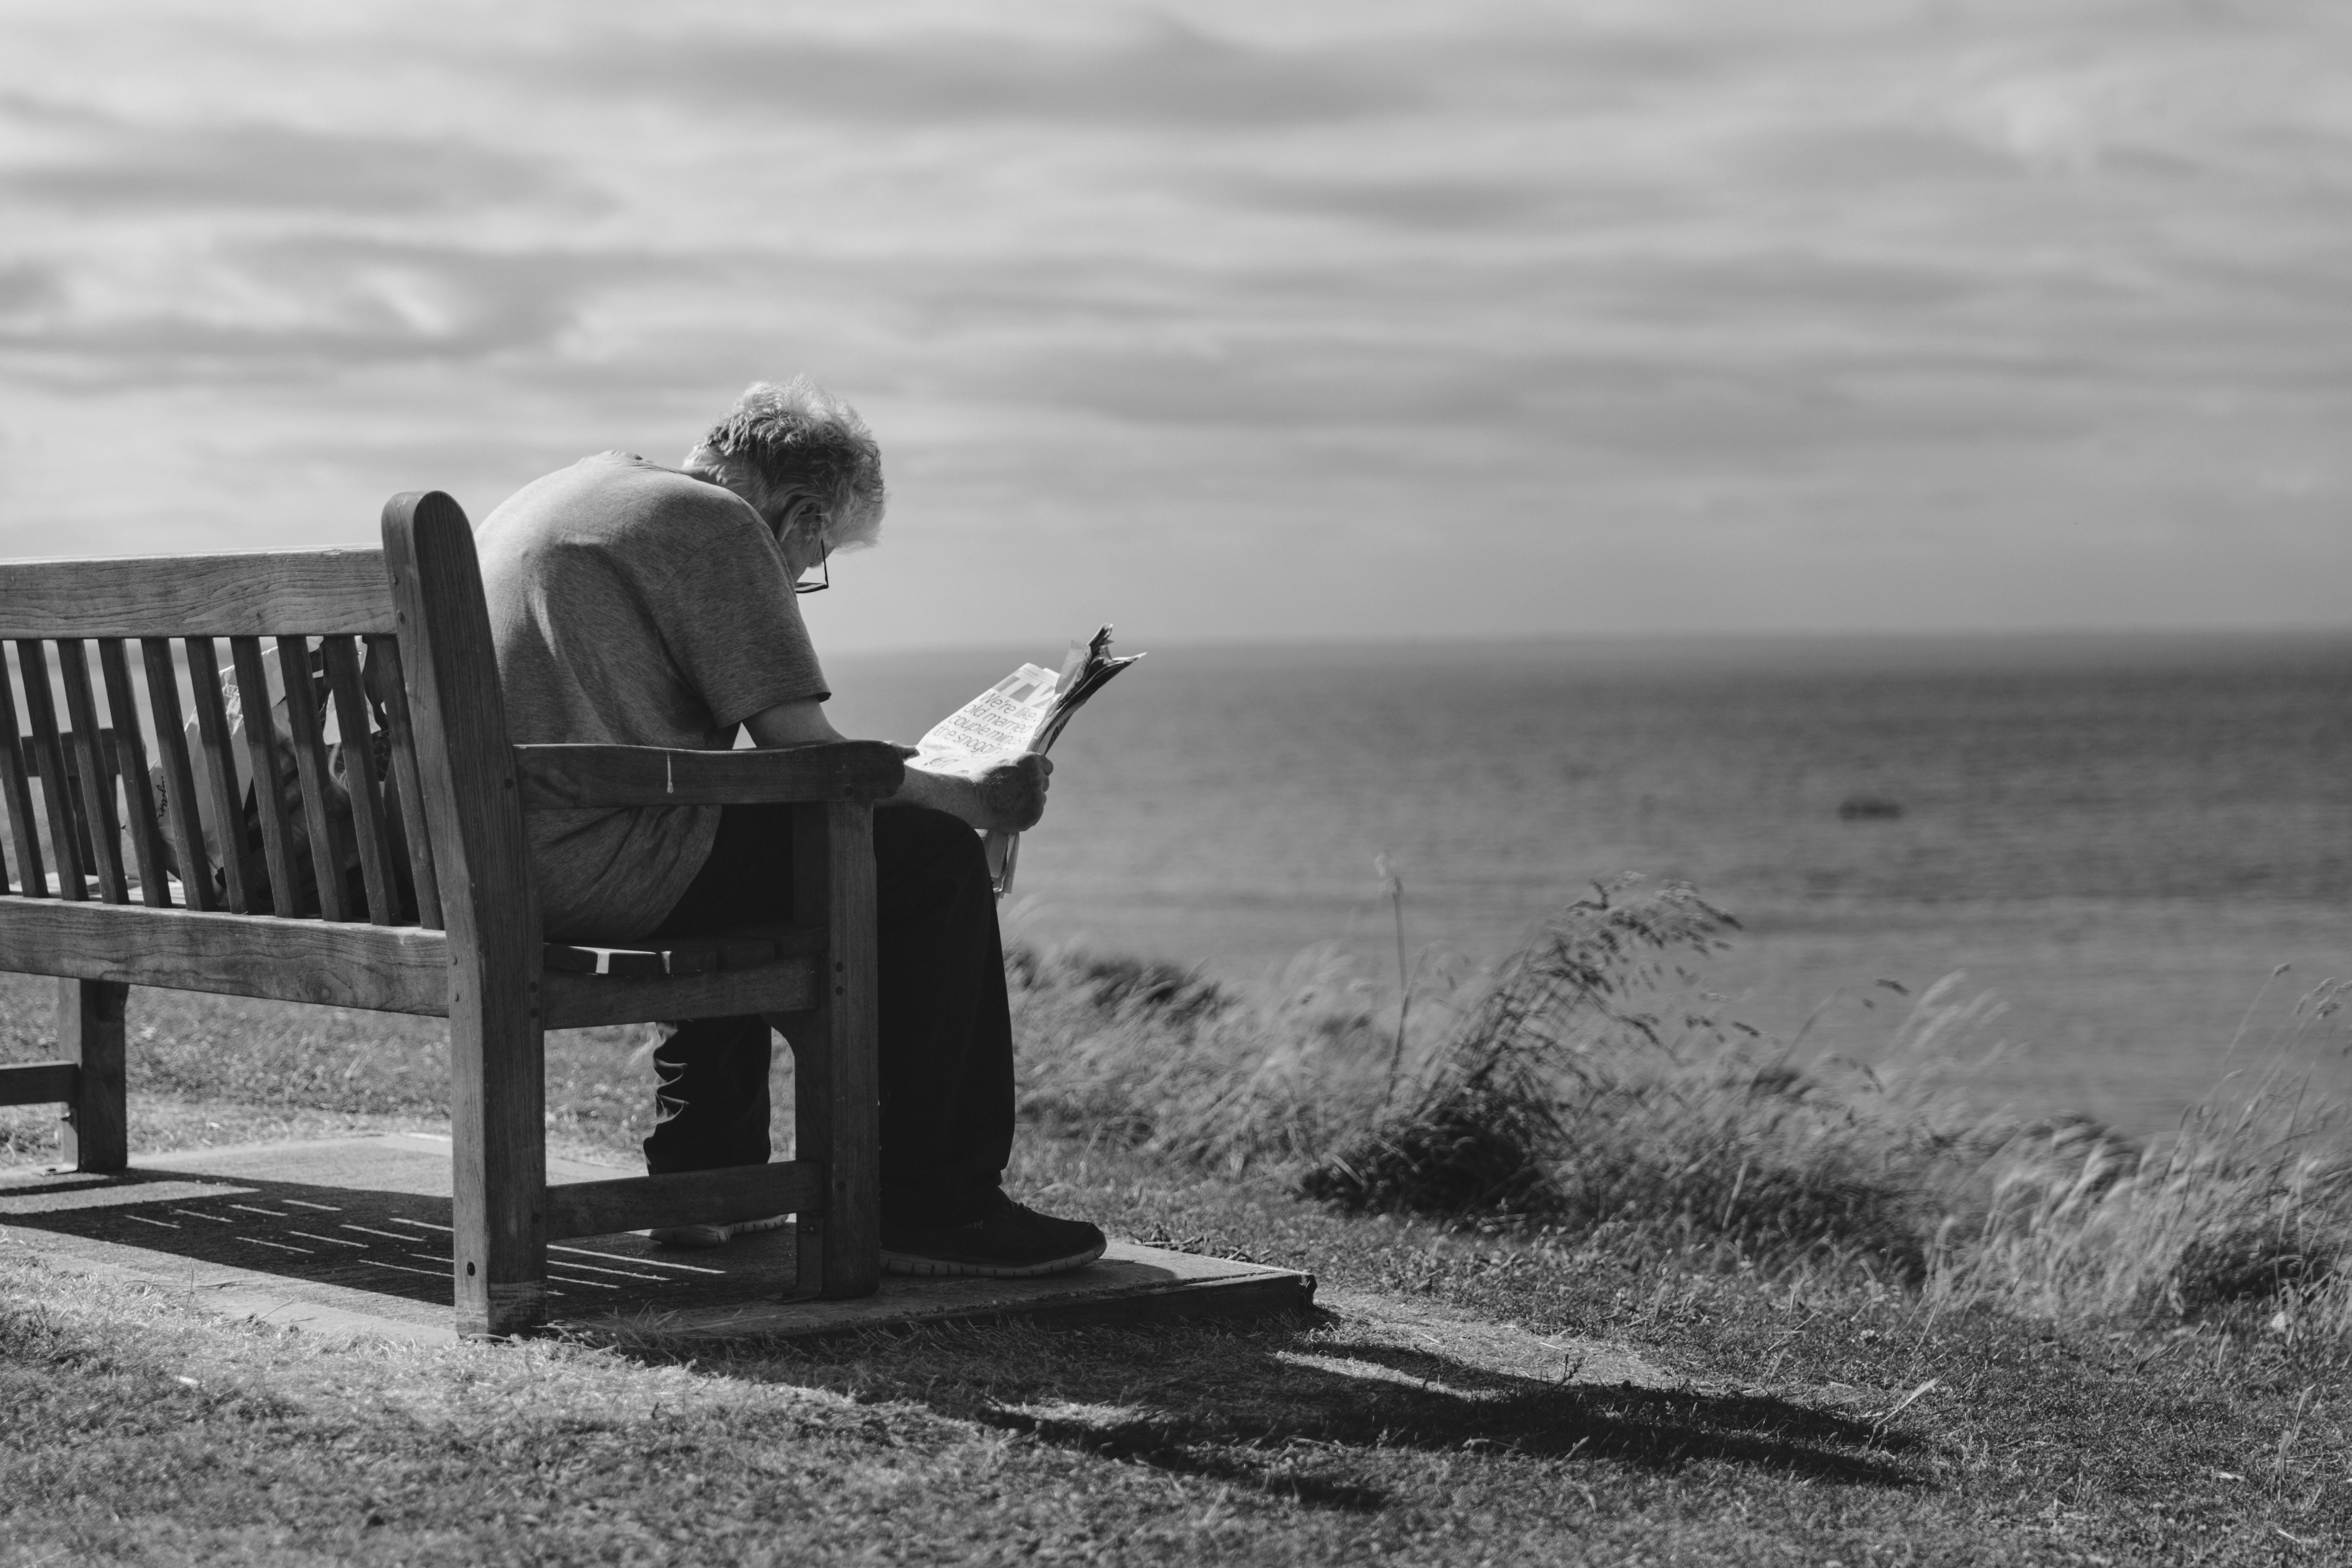 Grayscale Photo of Man Sitting on Brown Wooden Bench Reading News Paper during Day Time, Adult, Old man, Seaside, Seashore, HQ Photo